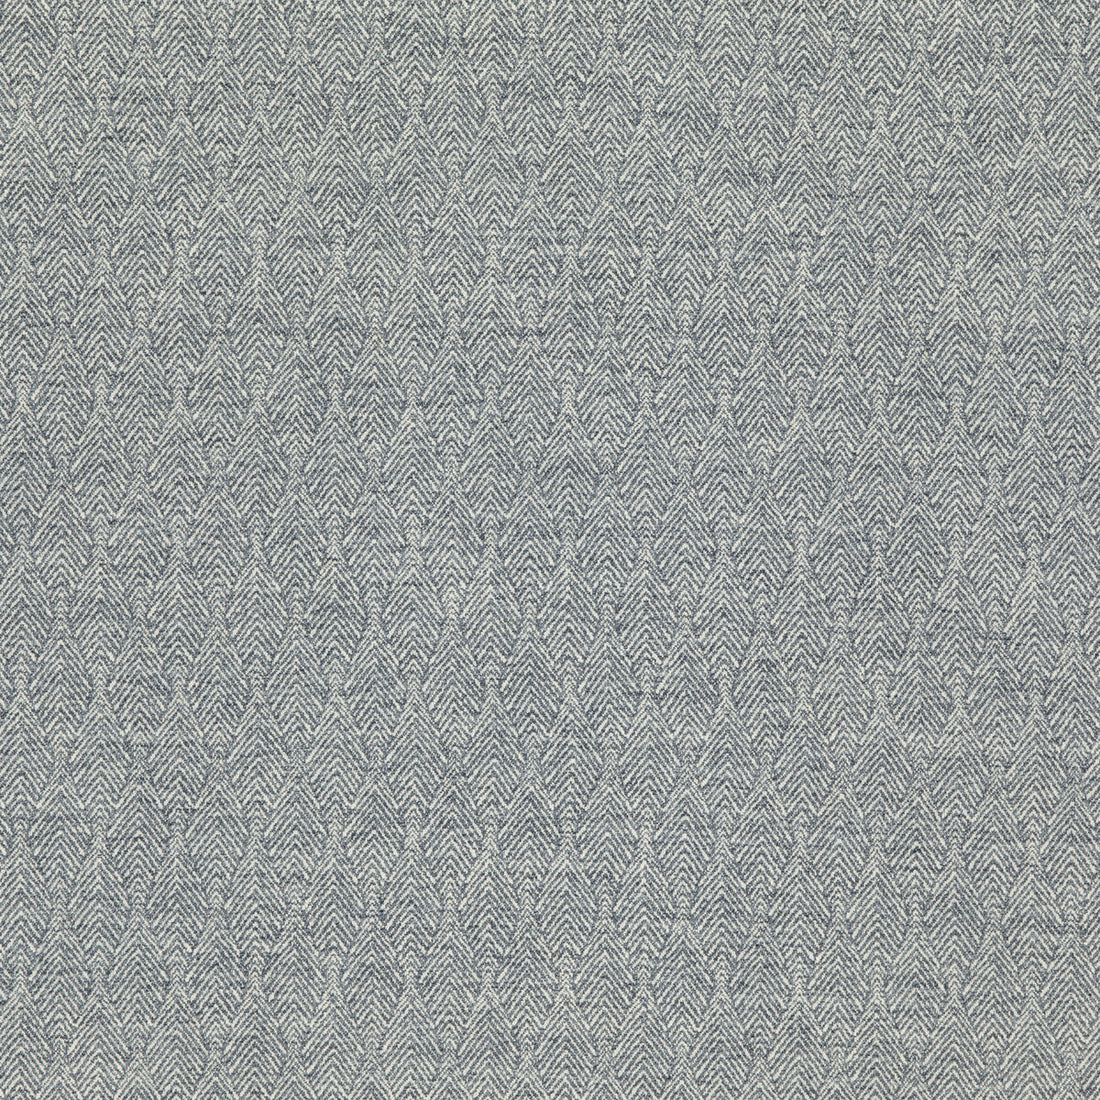 Capo fabric in indigo color - pattern ED85298.680.0 - by Threads in the Luxury Weaves collection